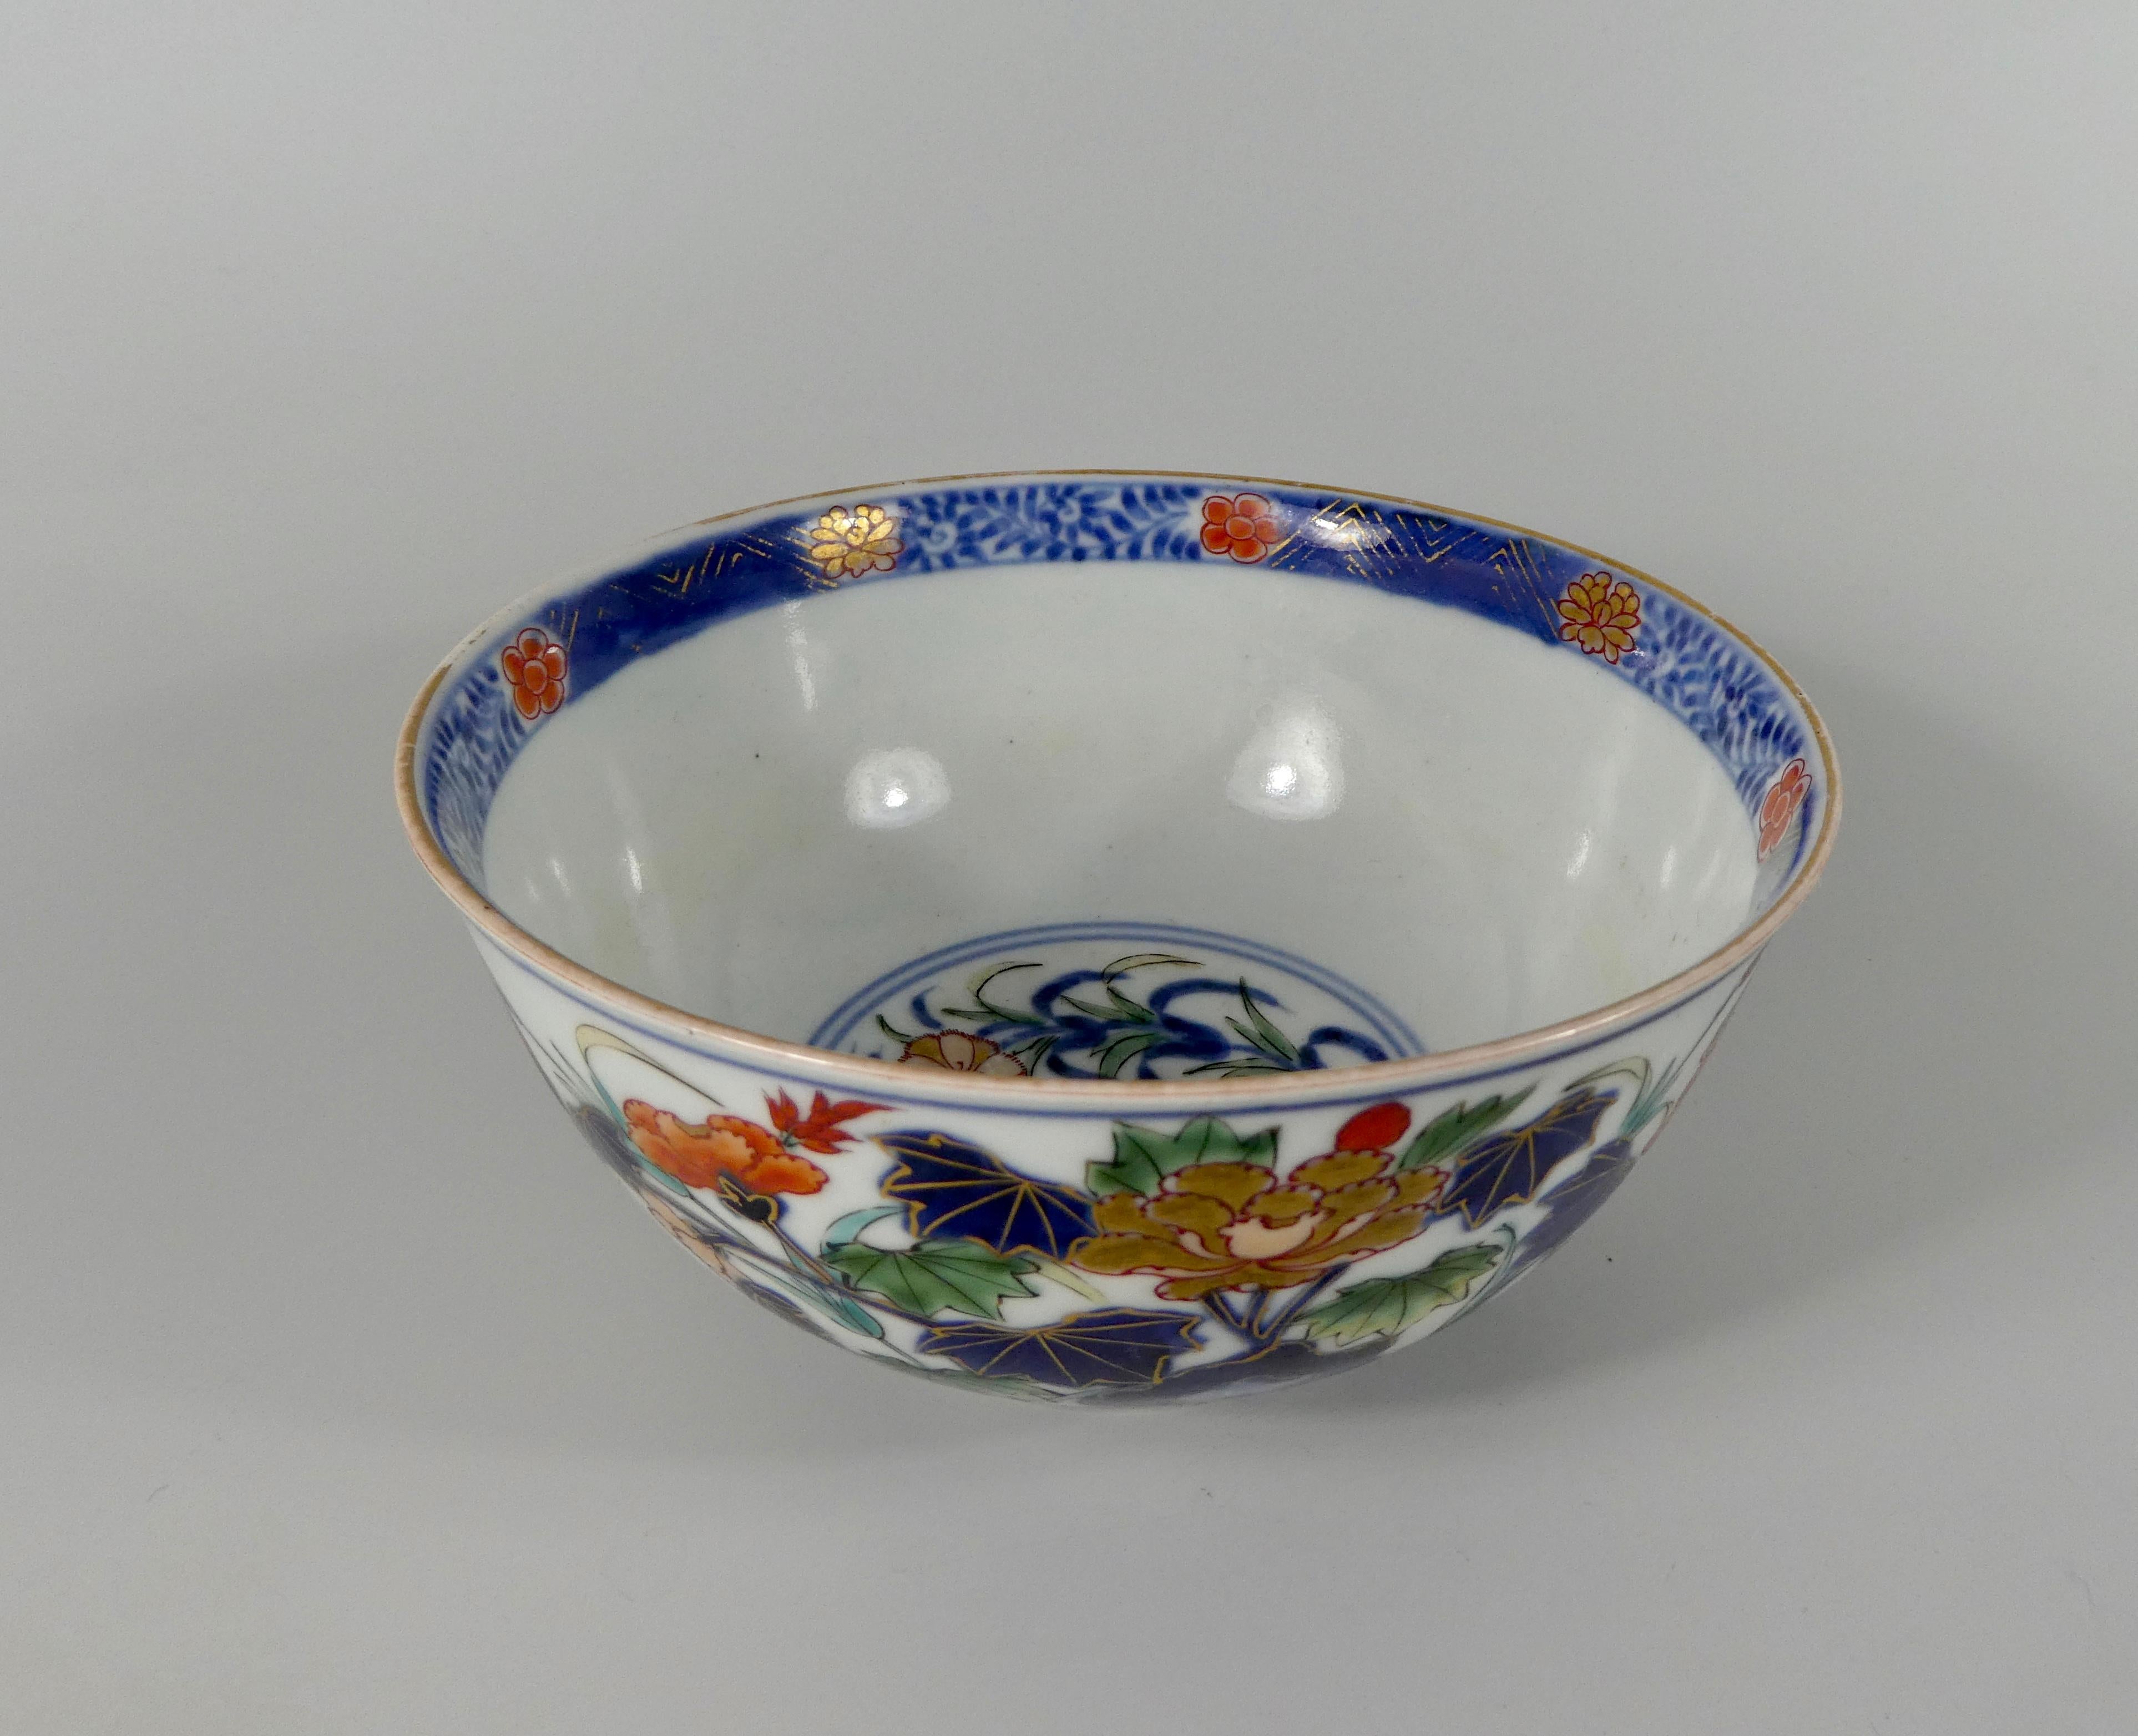 A fine Japanese porcelain bowl, Arita, late 17th-early 18th century. Beautifully painted in ‘Imari’ style, with a continuous scene of flowering plants growing amongst rocks, in underglaze blue, green, yellow, iron red, and heightened in gilt; above